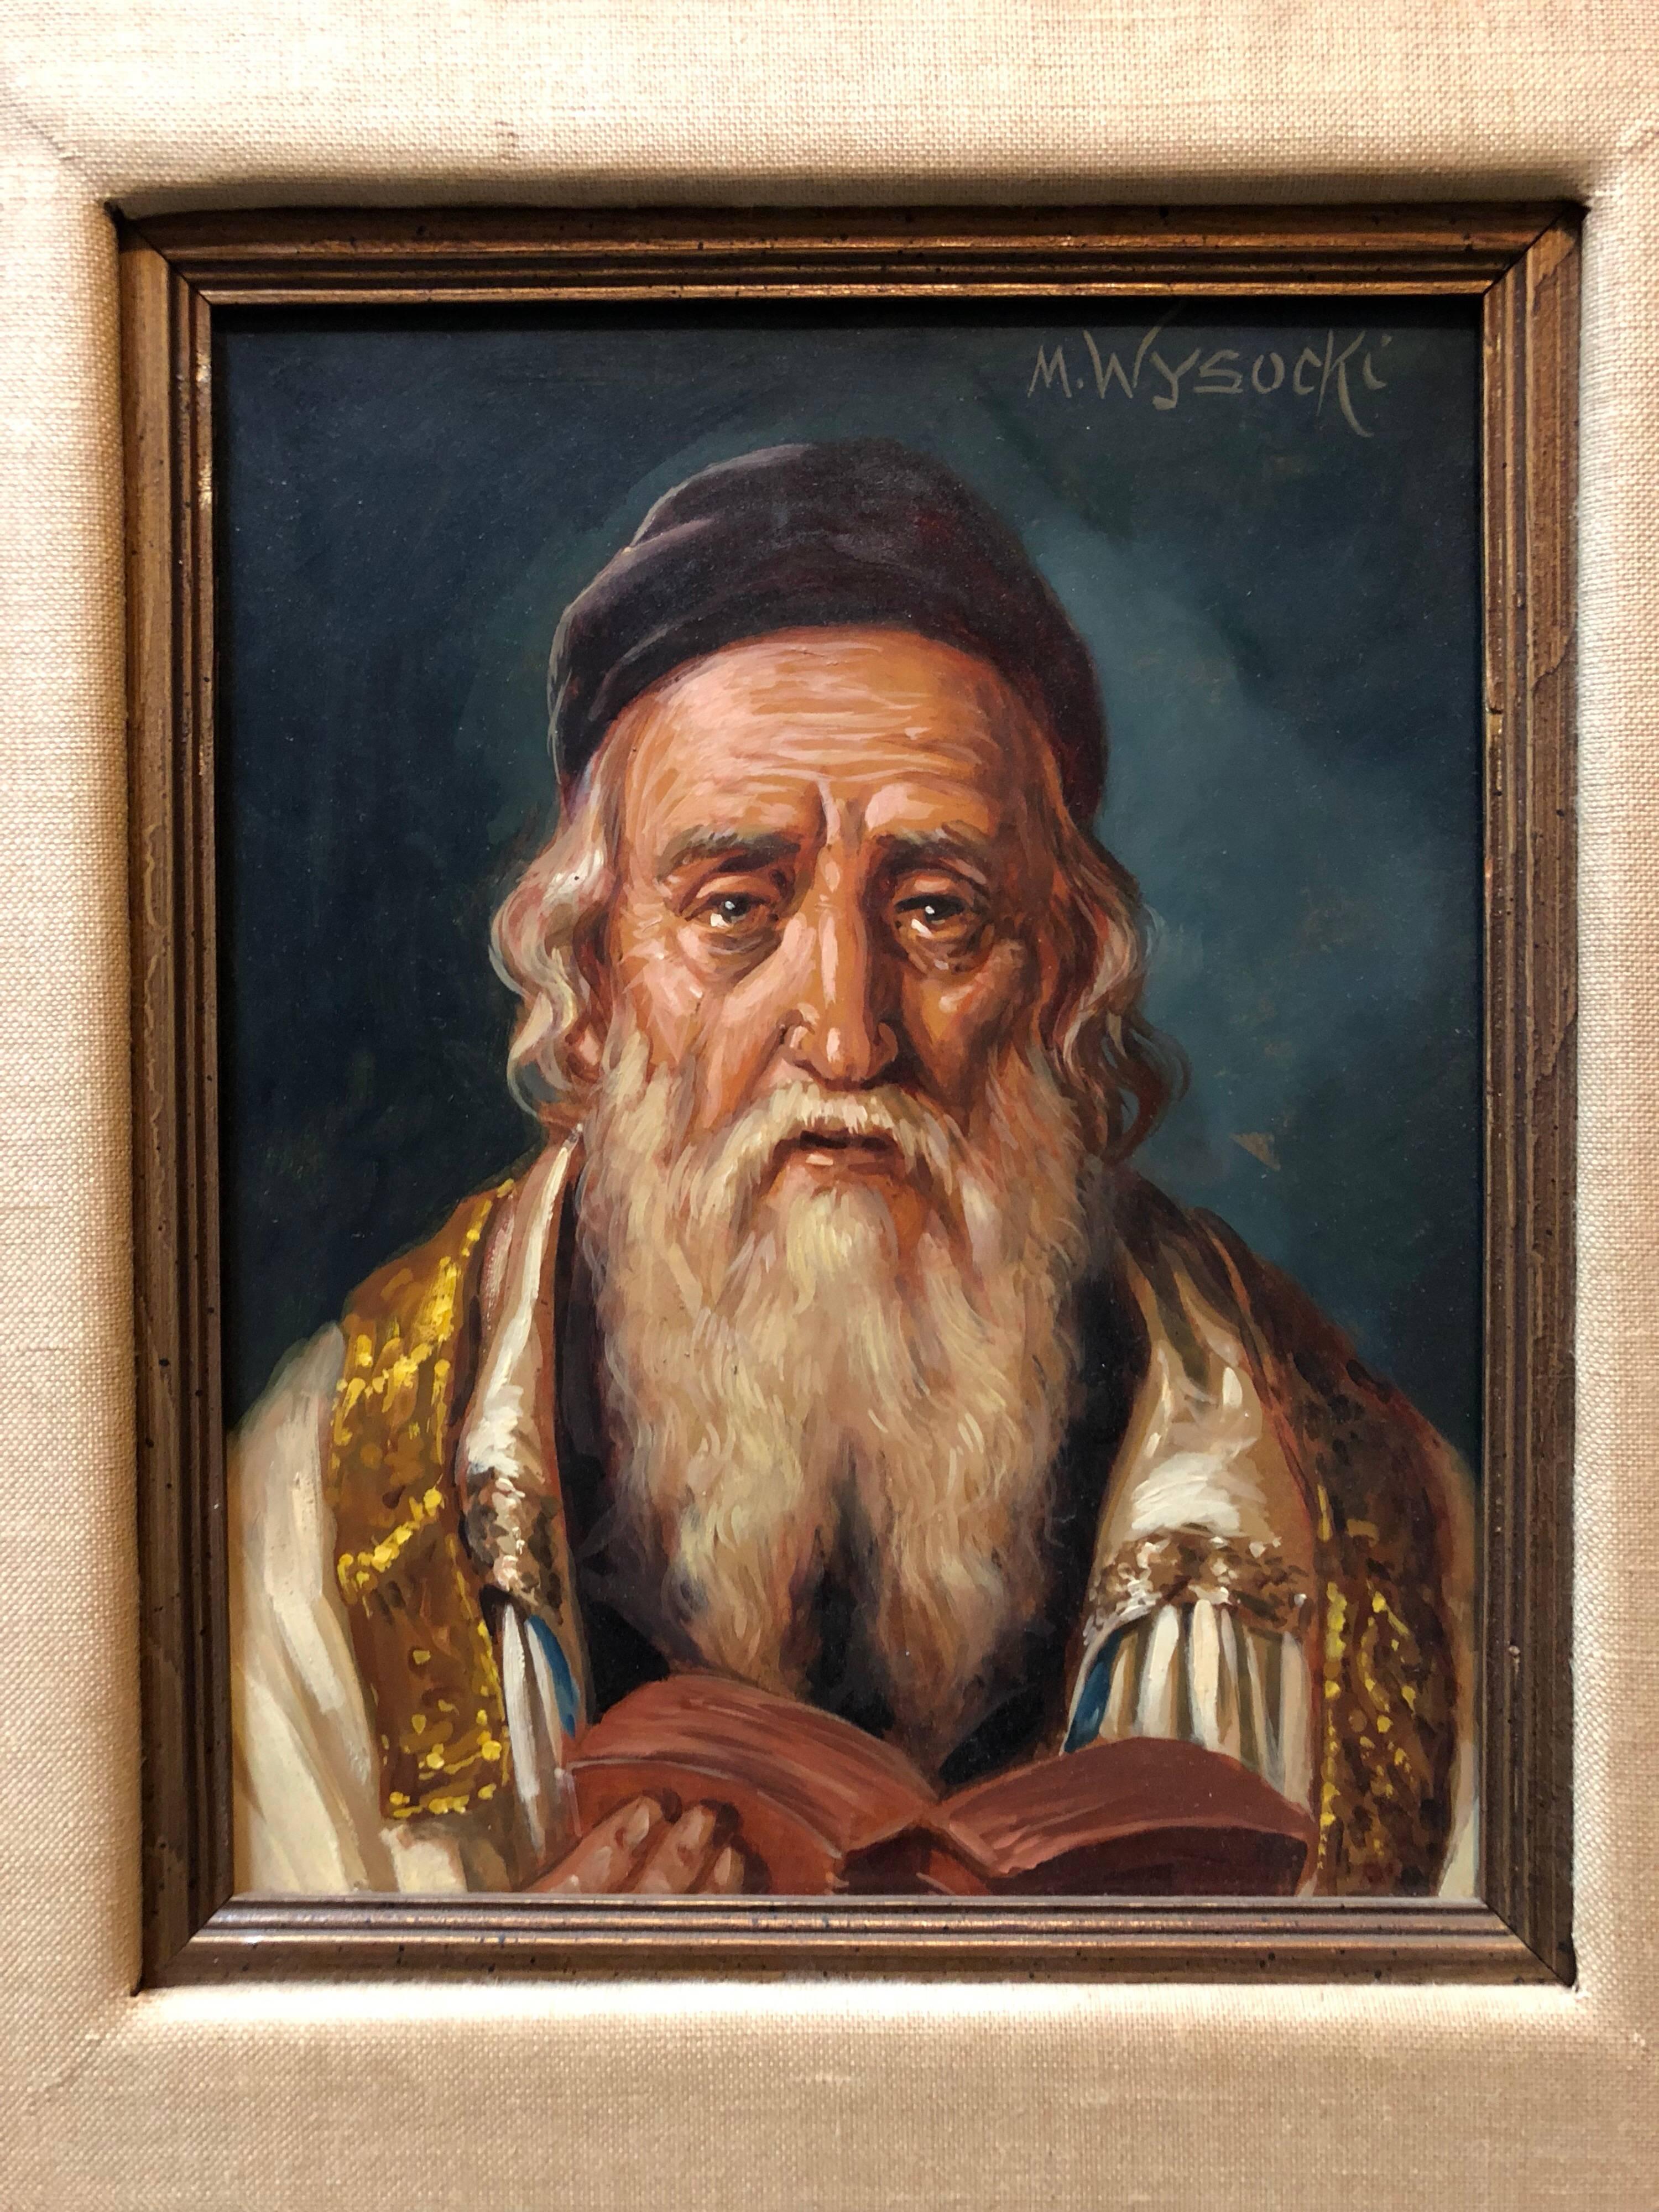 Realistic portrait of an older rabbi by Polish Austrian artist M. Wysocki. Here the artist conveys a sense of quiet grandeur through the eyes of his subject and the way it's rendered. Part of a distinguished European lineage of Jewish genre artists